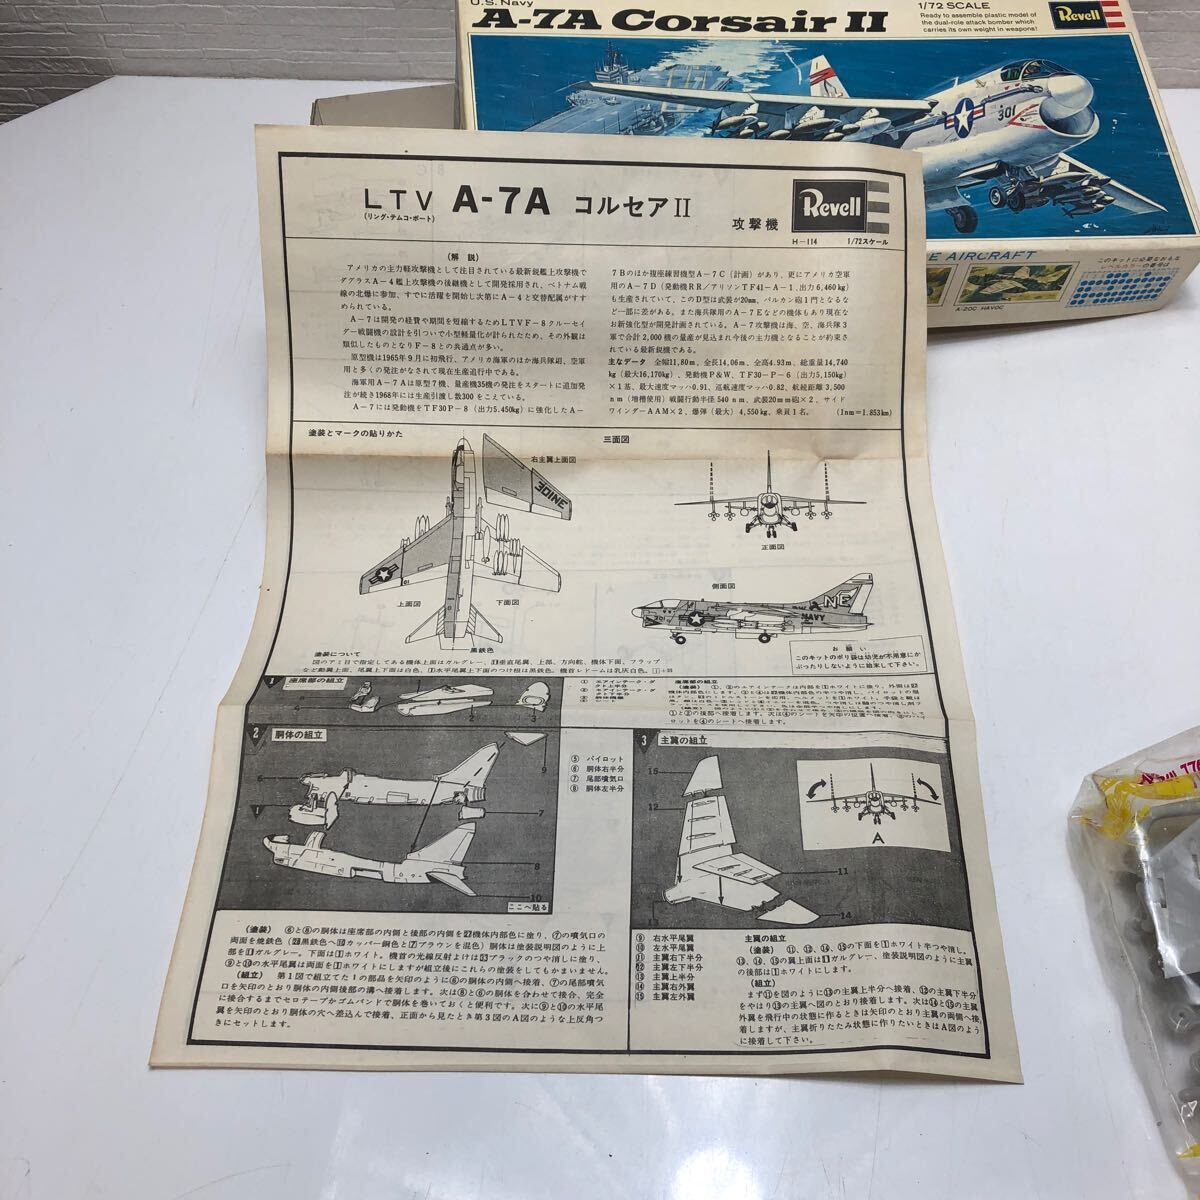  selling up!1 jpy start! Revell Revell 1/72 ring *temko* boat LTV A-7A Corse aⅡ out of print that time thing Showa era cheap sweets dagashi shop plastic model 